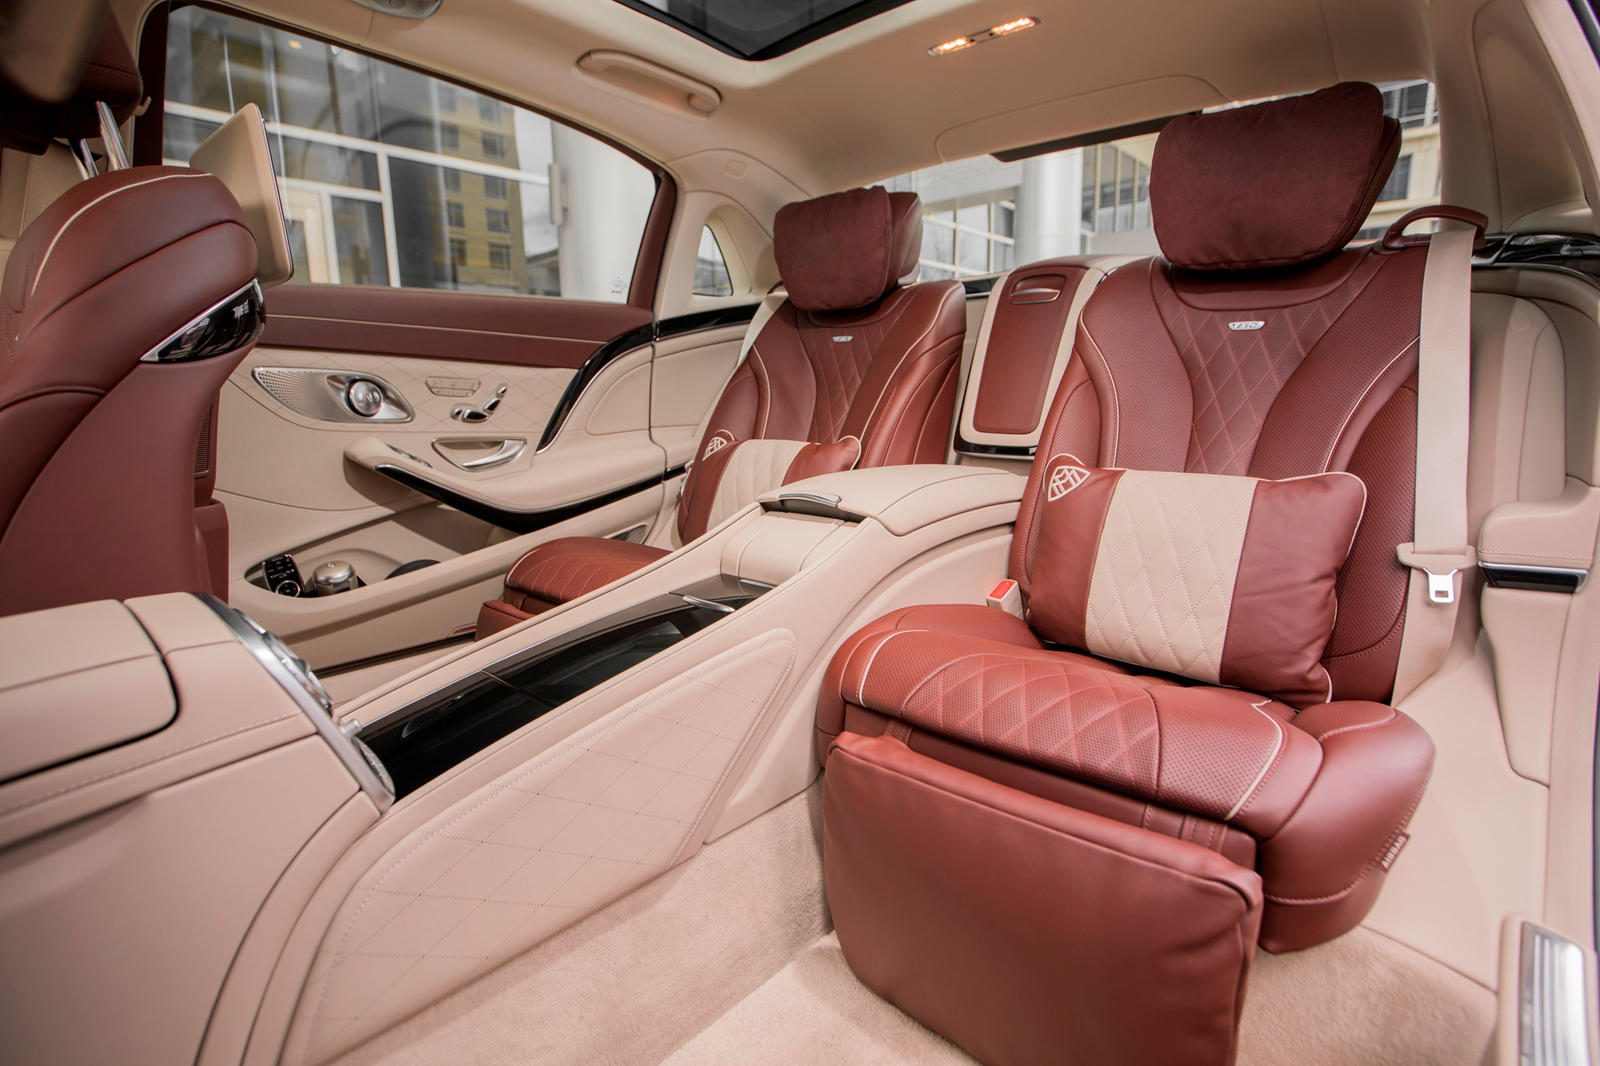 Andes Oops Welcome 2018 Mercedes-Maybach S Interior Photos | CarBuzz